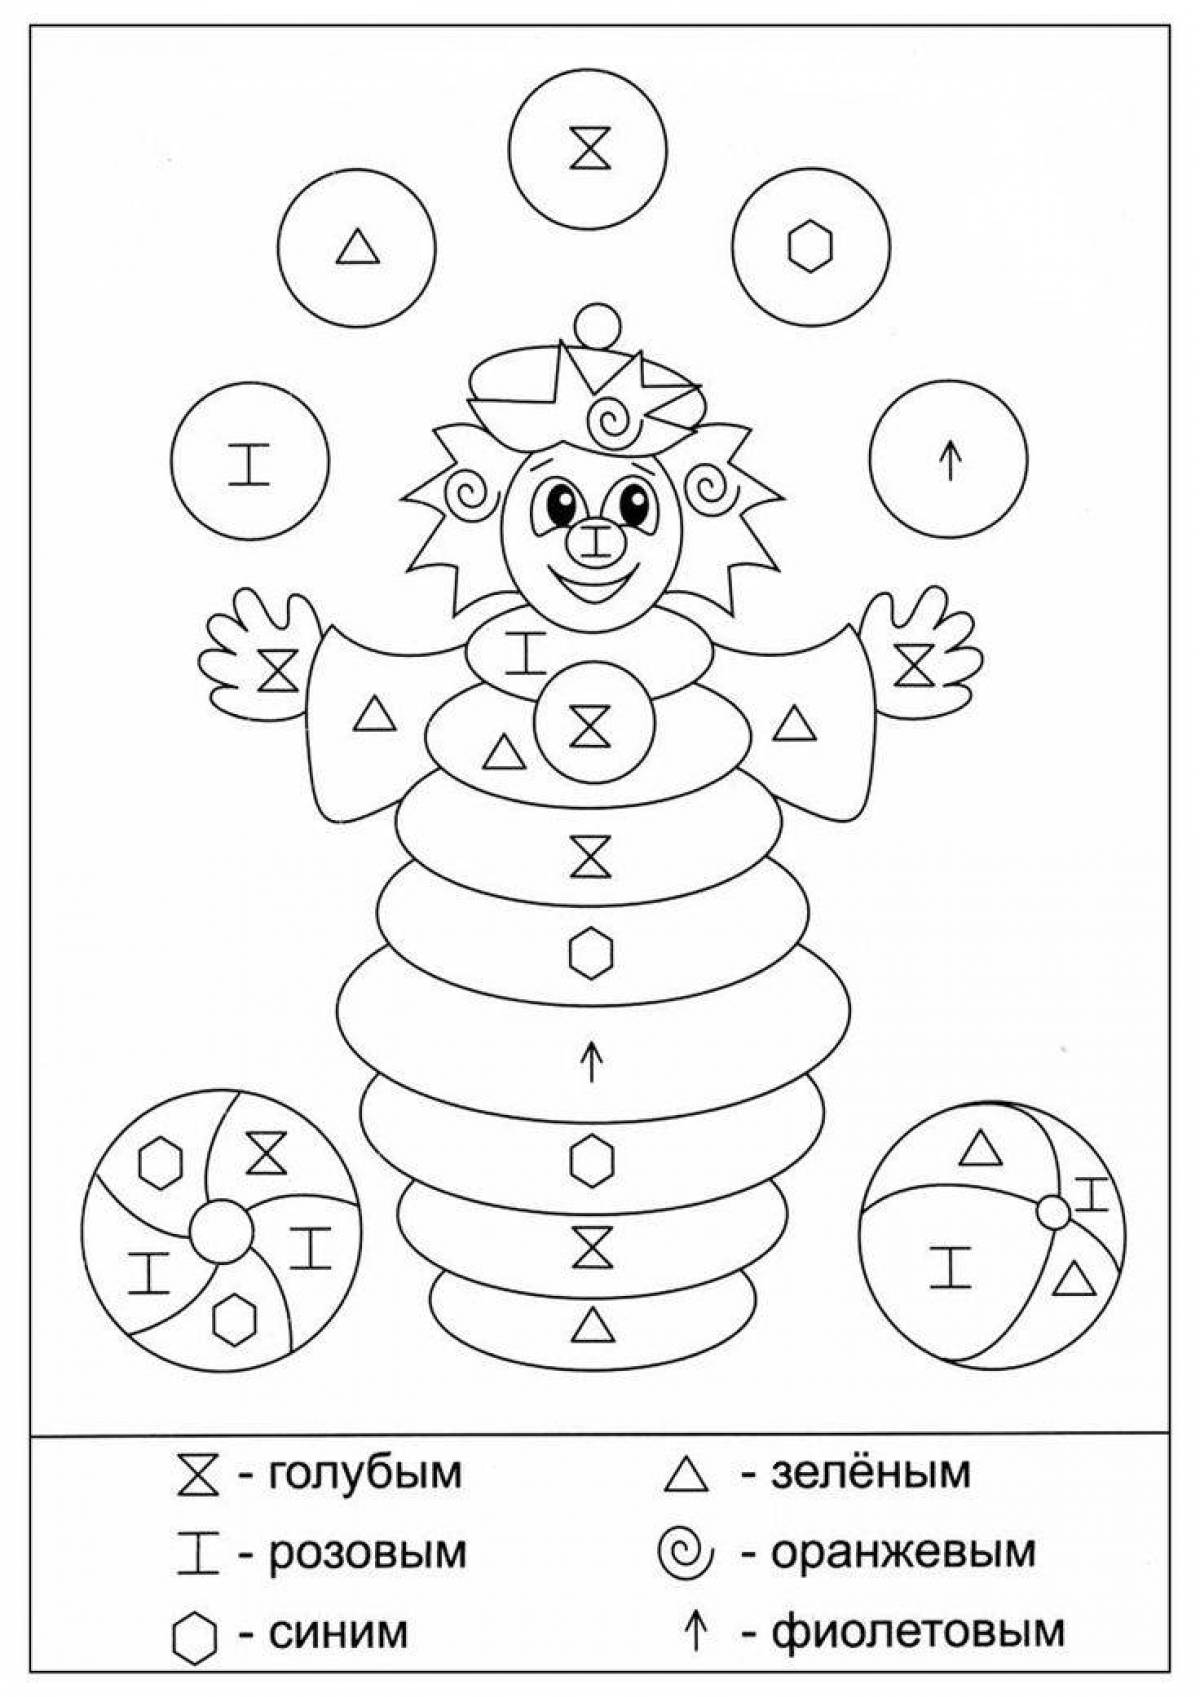 Developing coloring book with fun activities for kids 6-7 years old